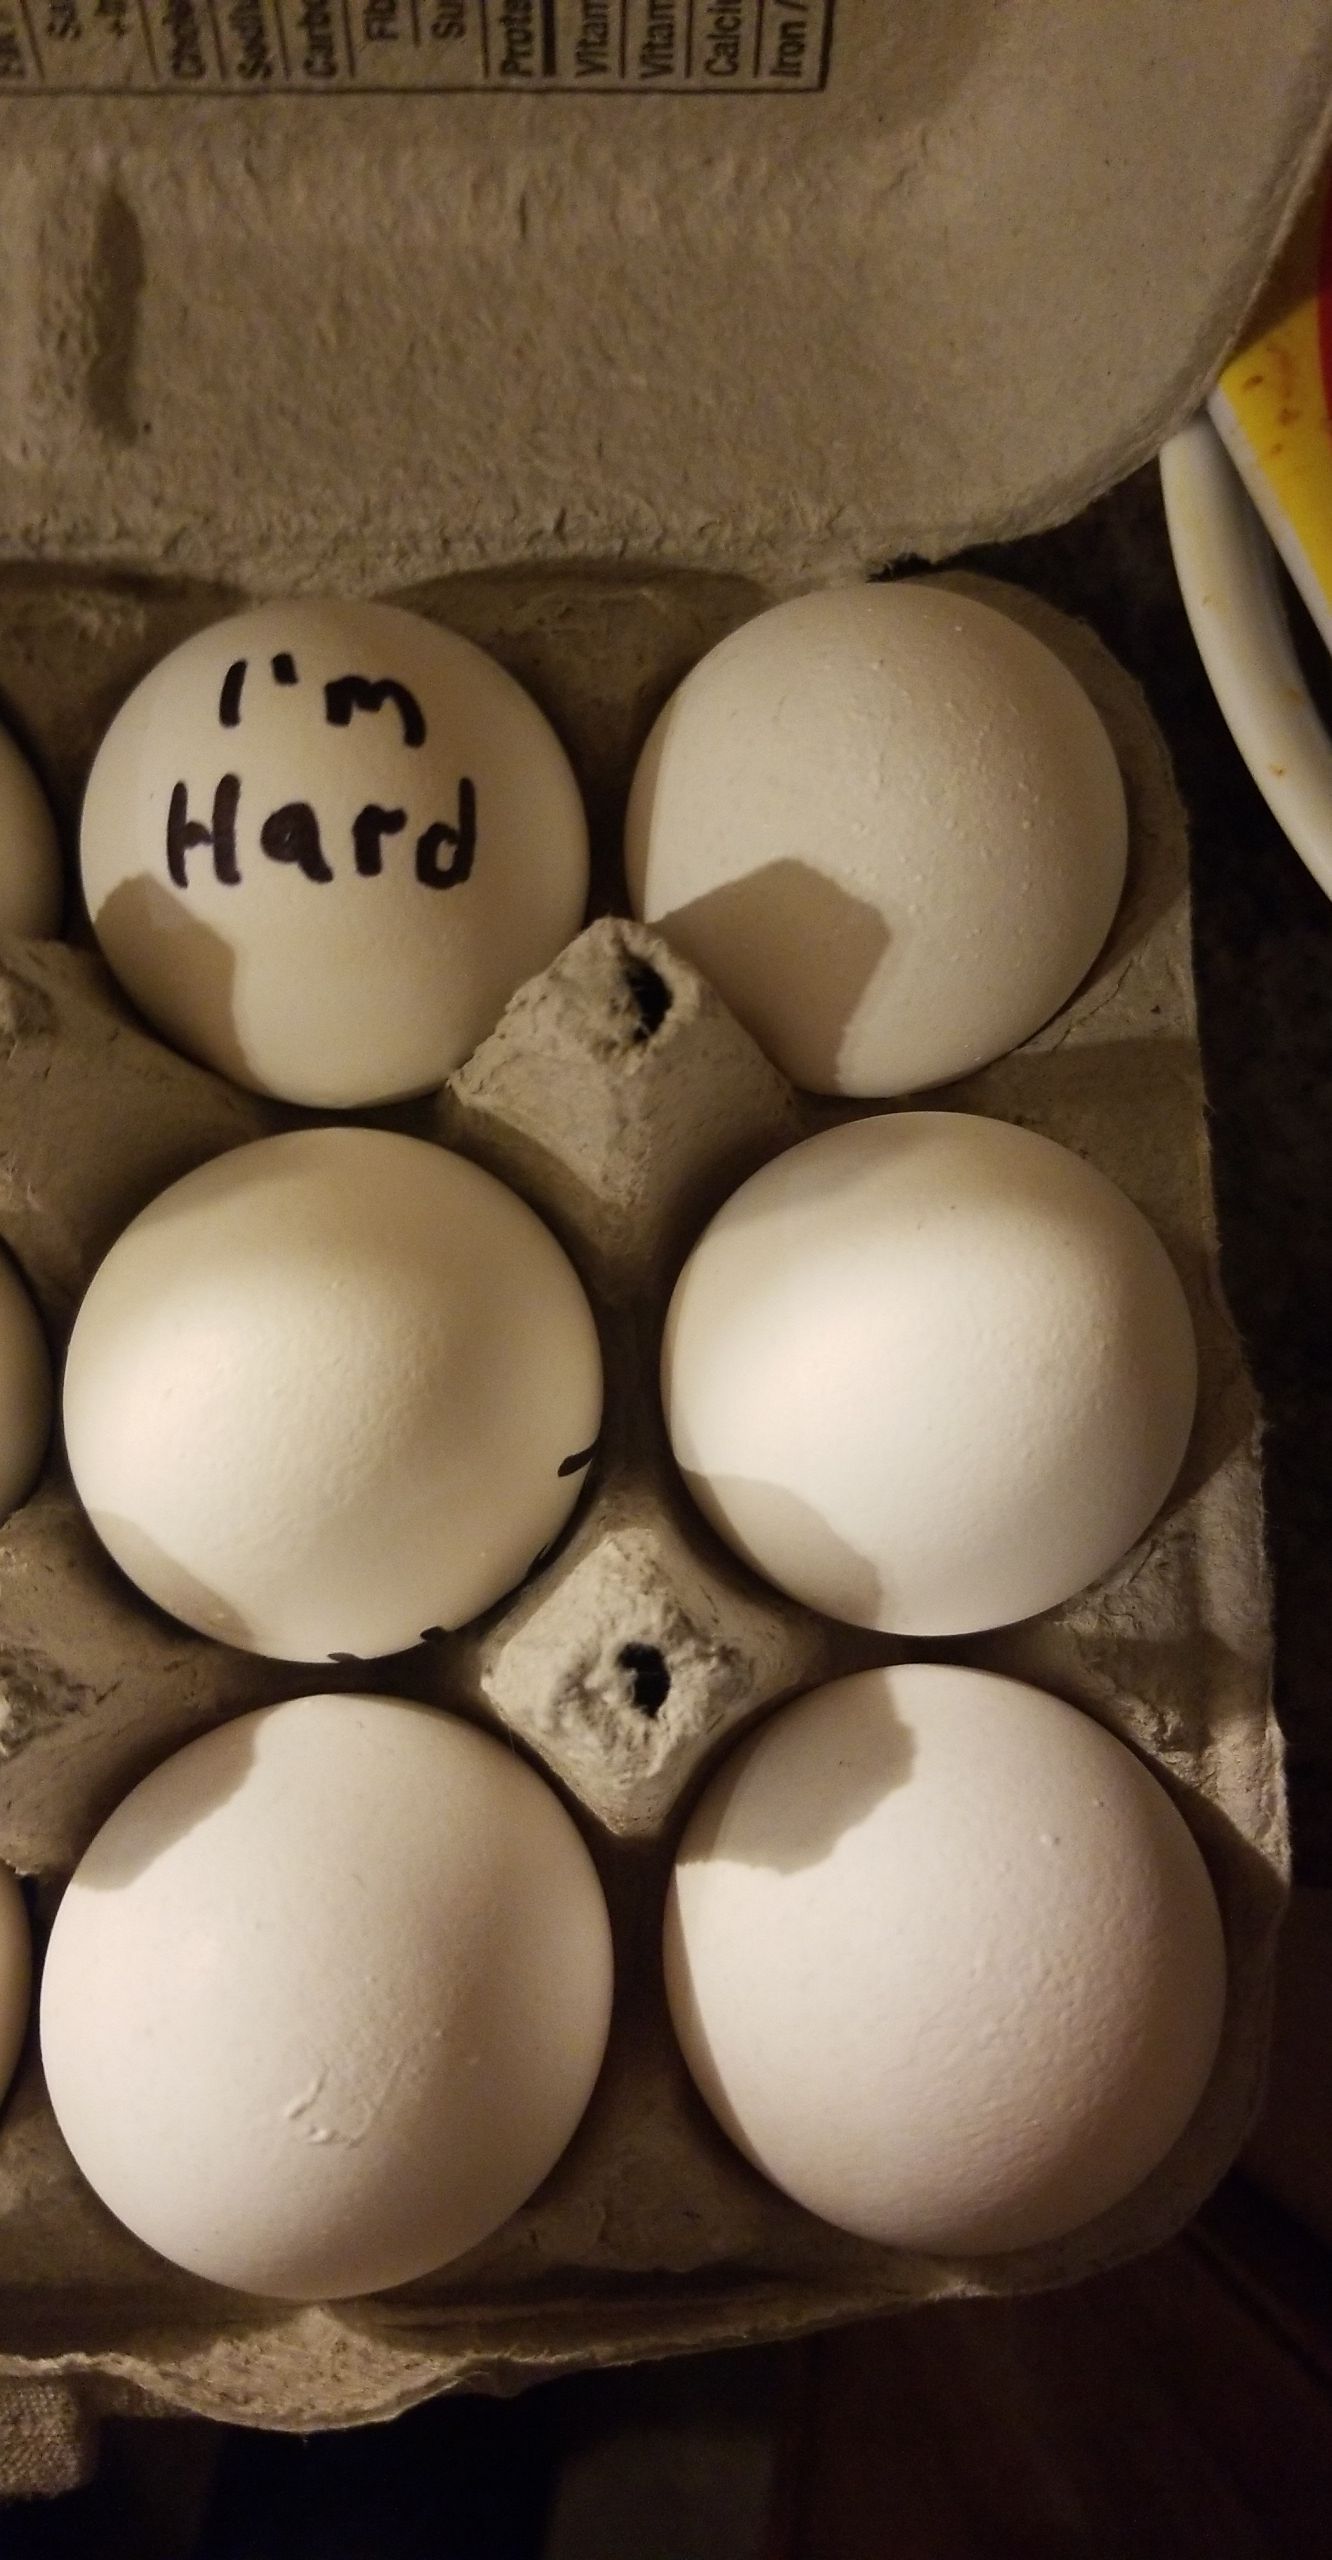 My wife asked me to make sure it was obvious which eggs were hard boiled.